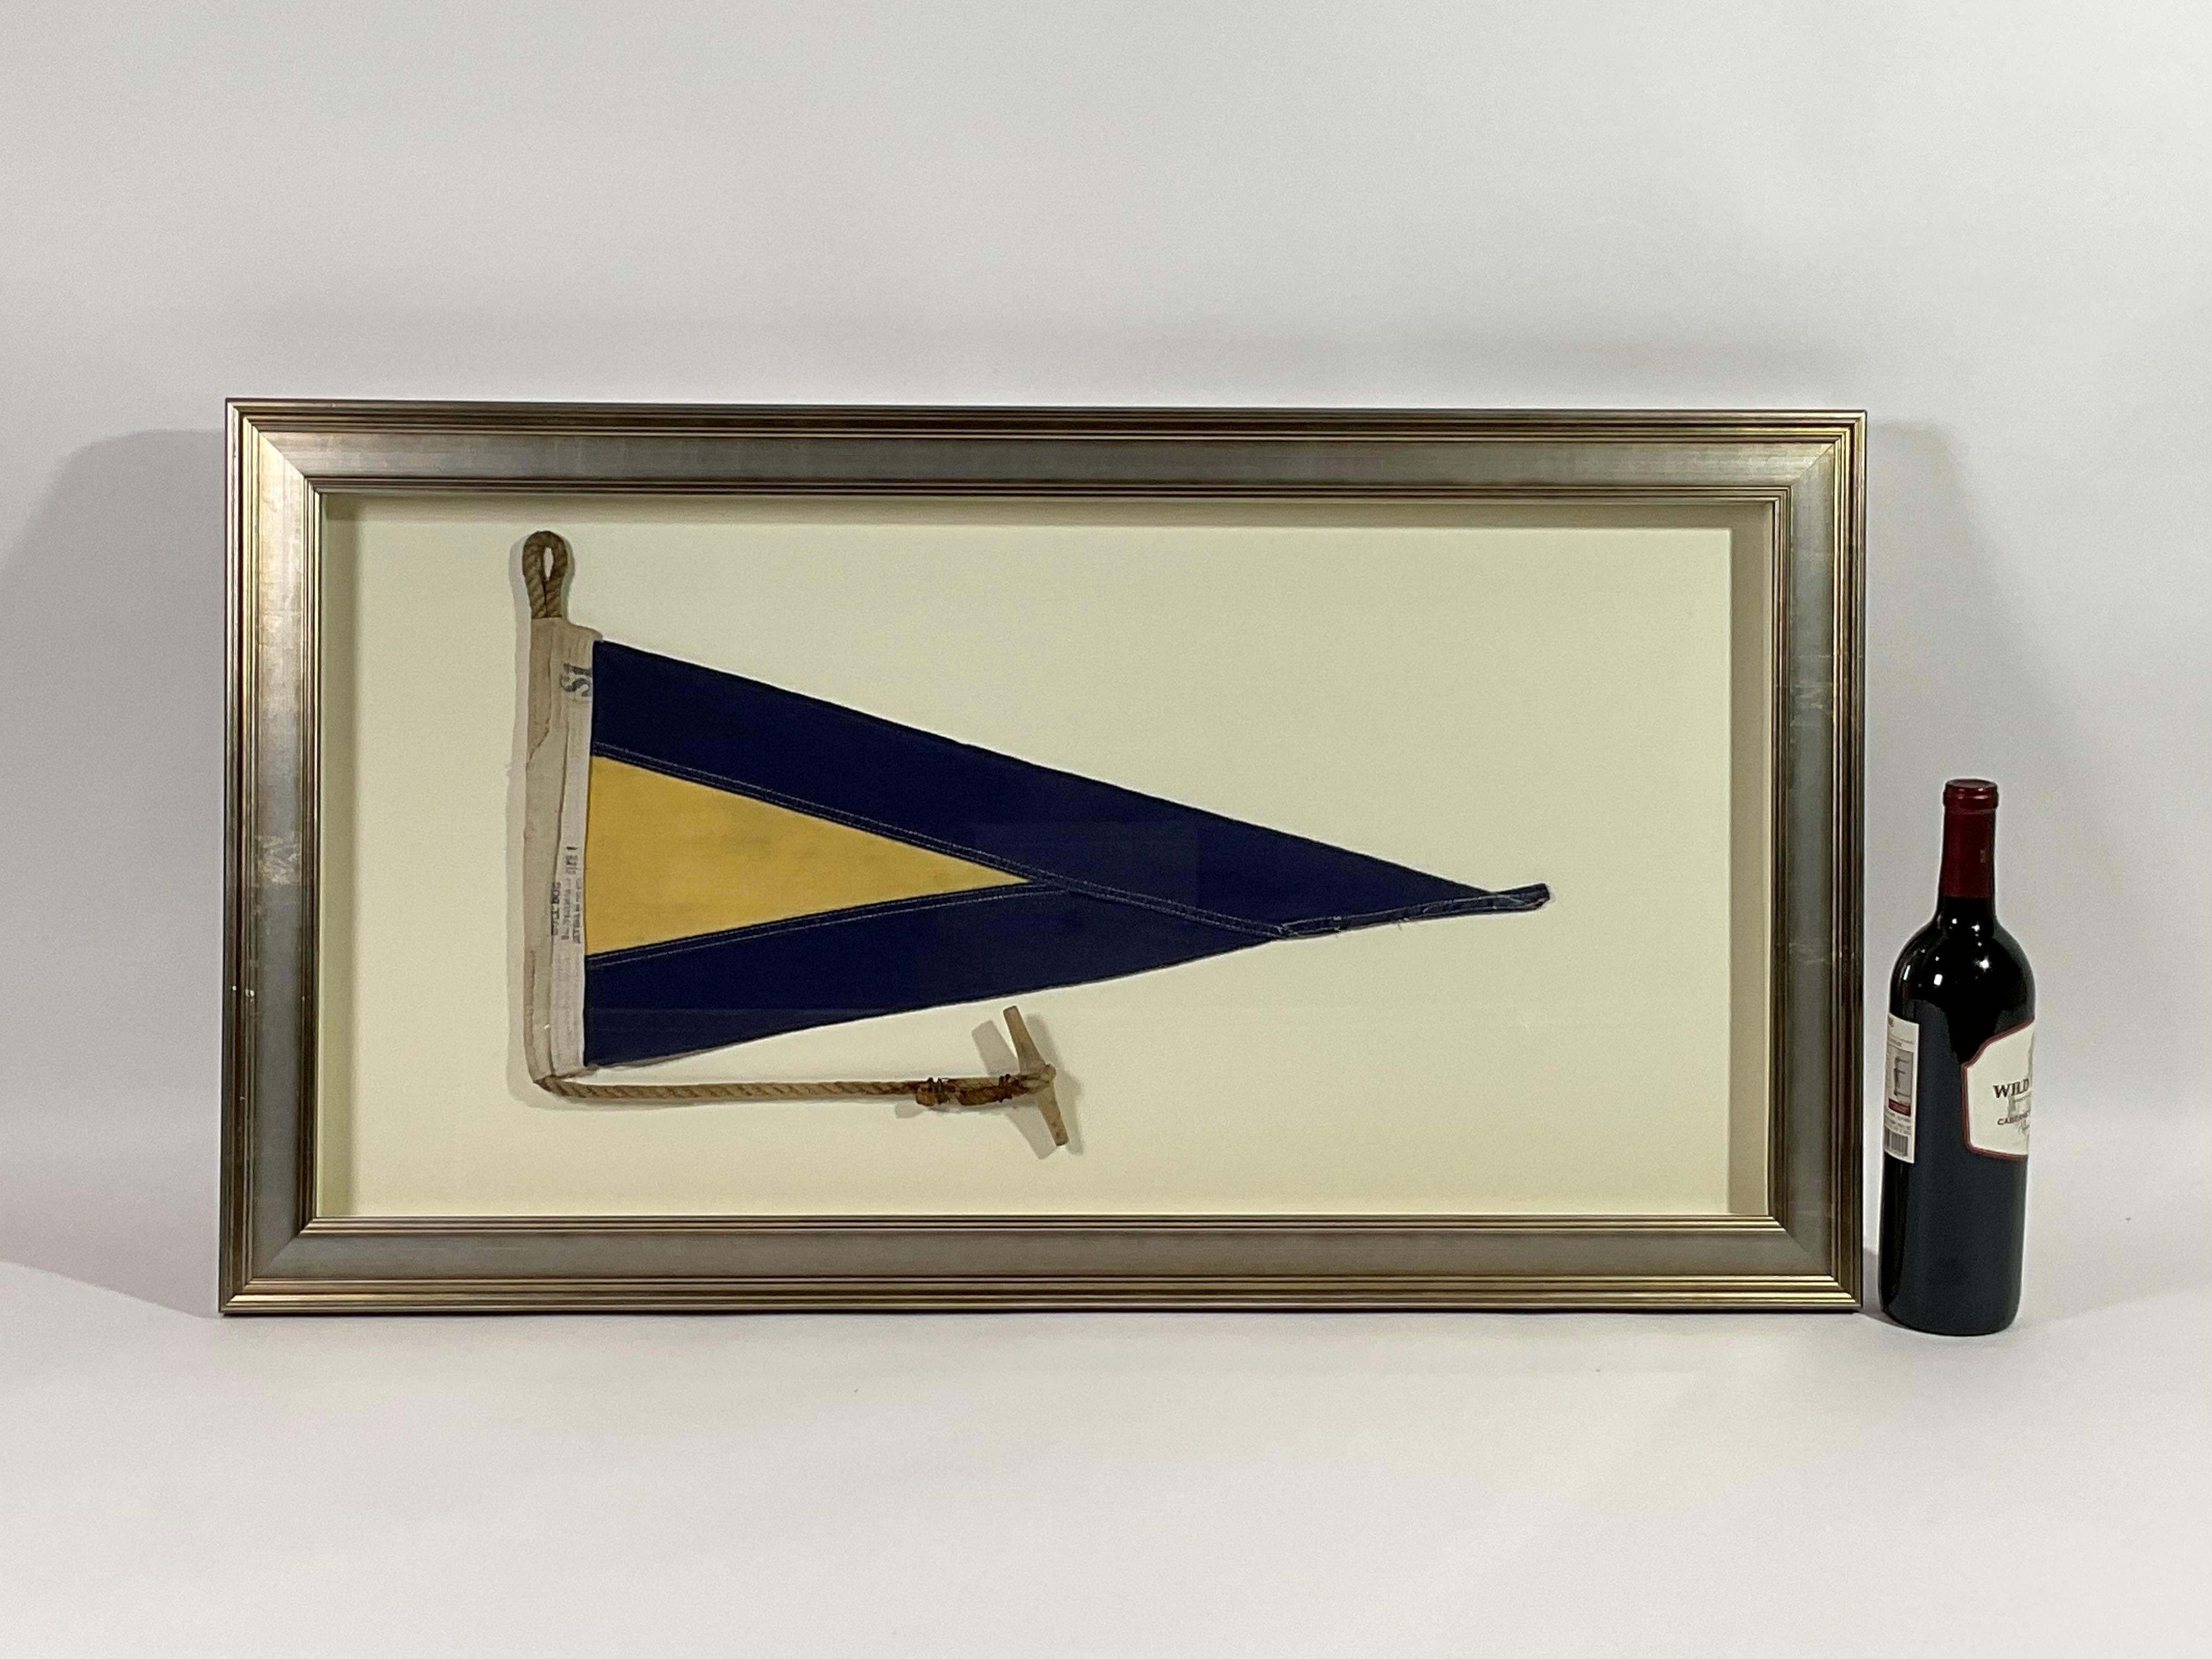 Framed maritime signal flag representing “SUBSTITUTE 1” in the international code of signals. This authentic and ocean used pennant is made of individual panels of yellow and blue. Fitted to a heavy canvas hoist band with original rope and wood